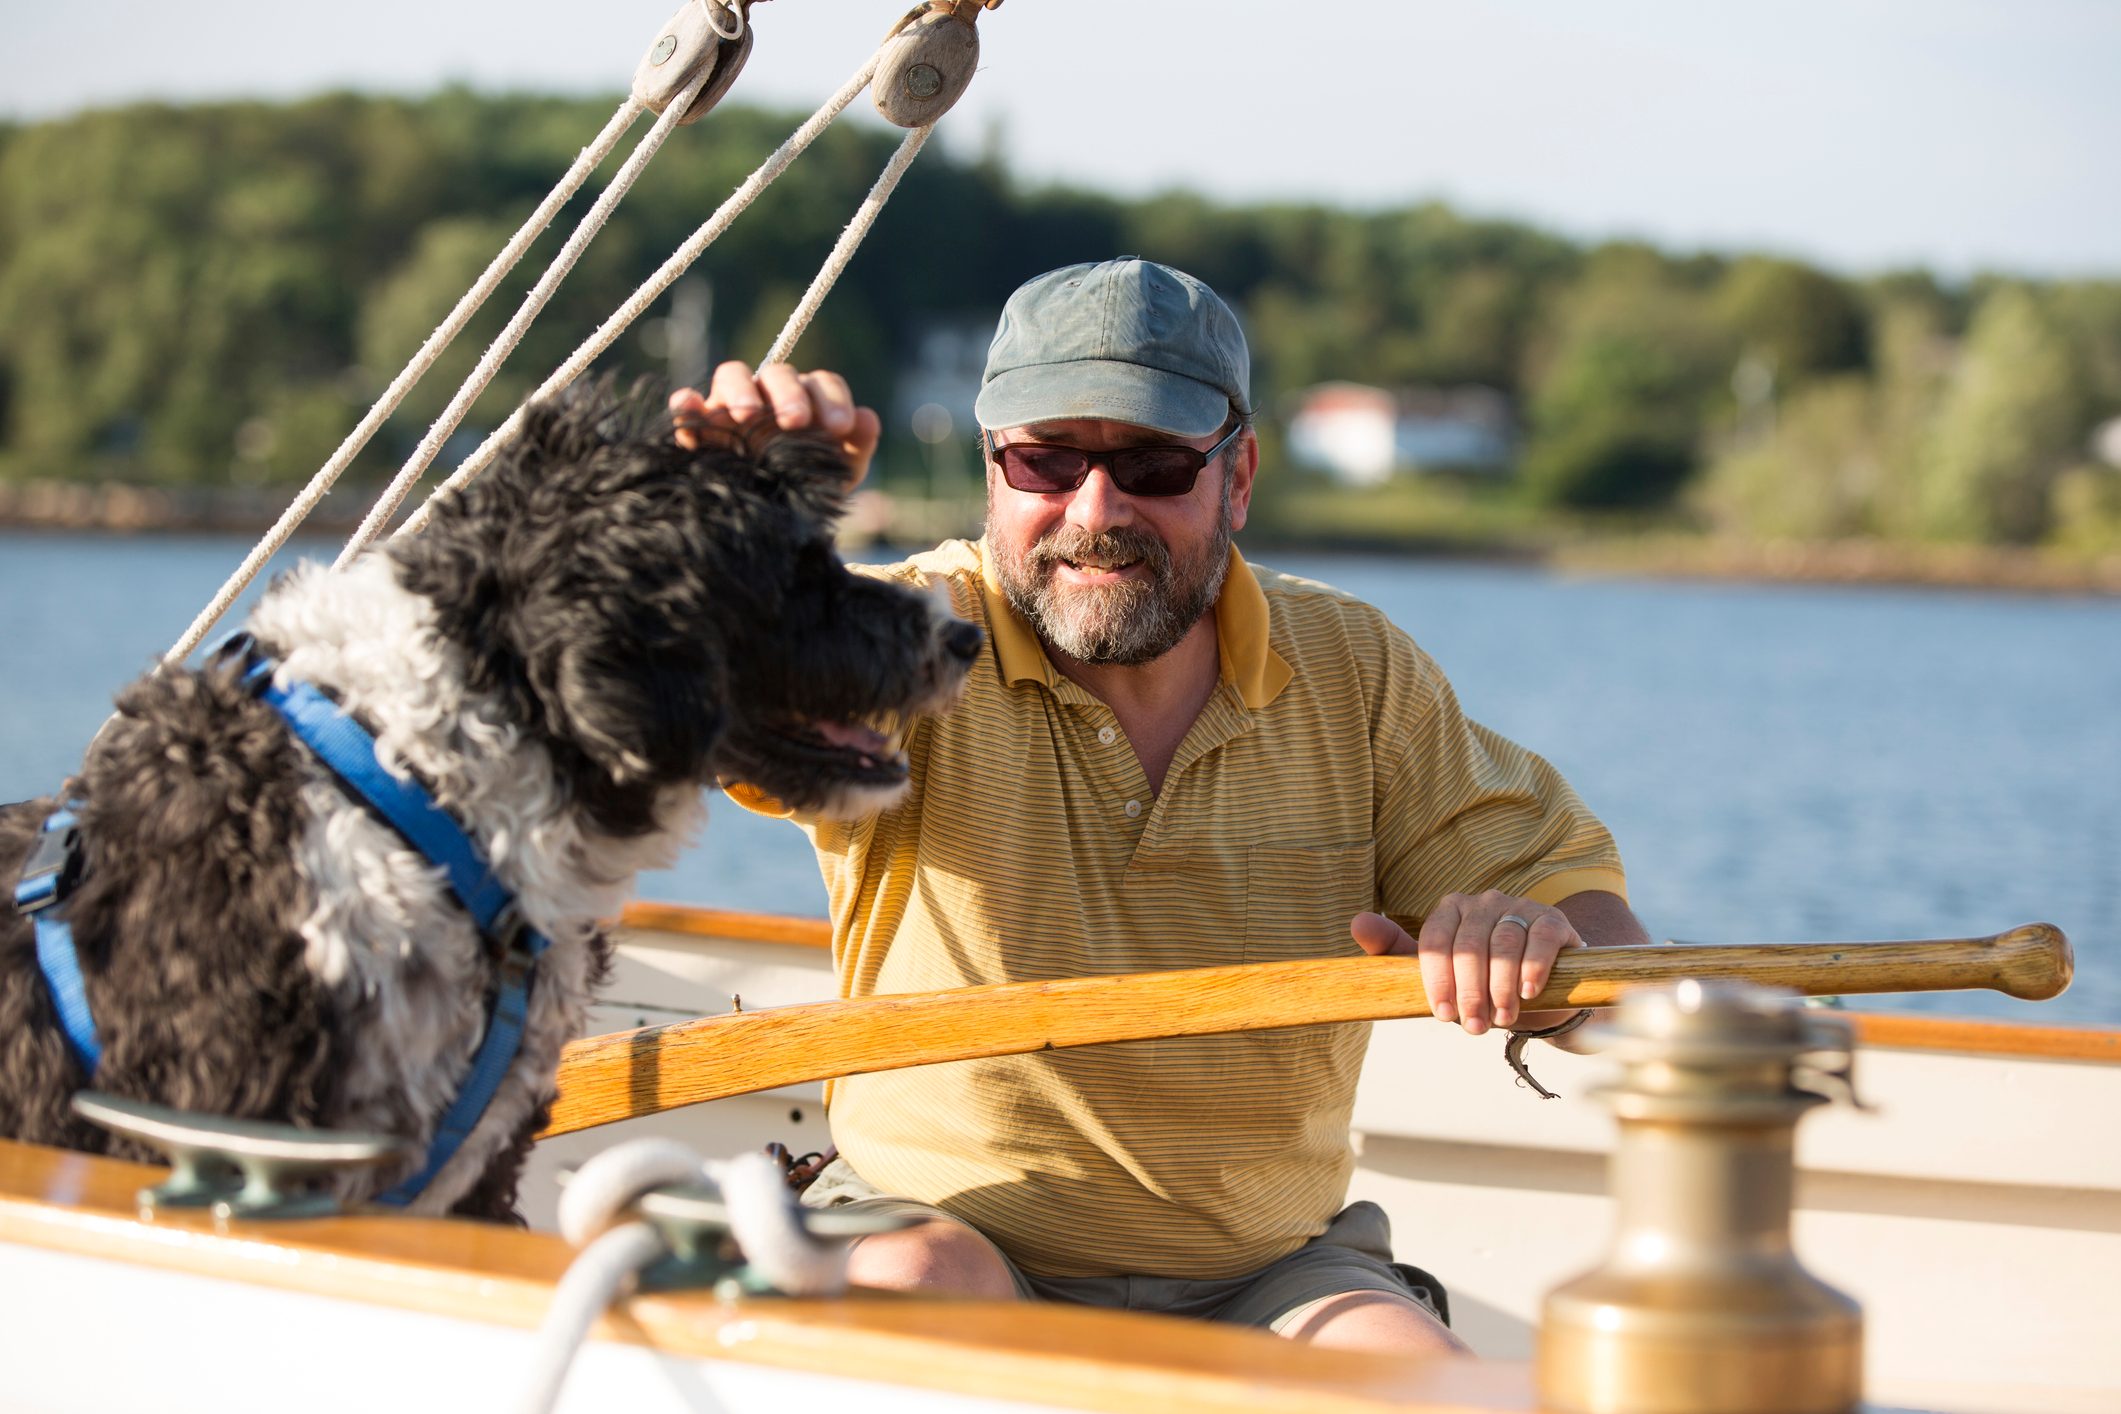 Man and his Portuguese water dog on a sailboat